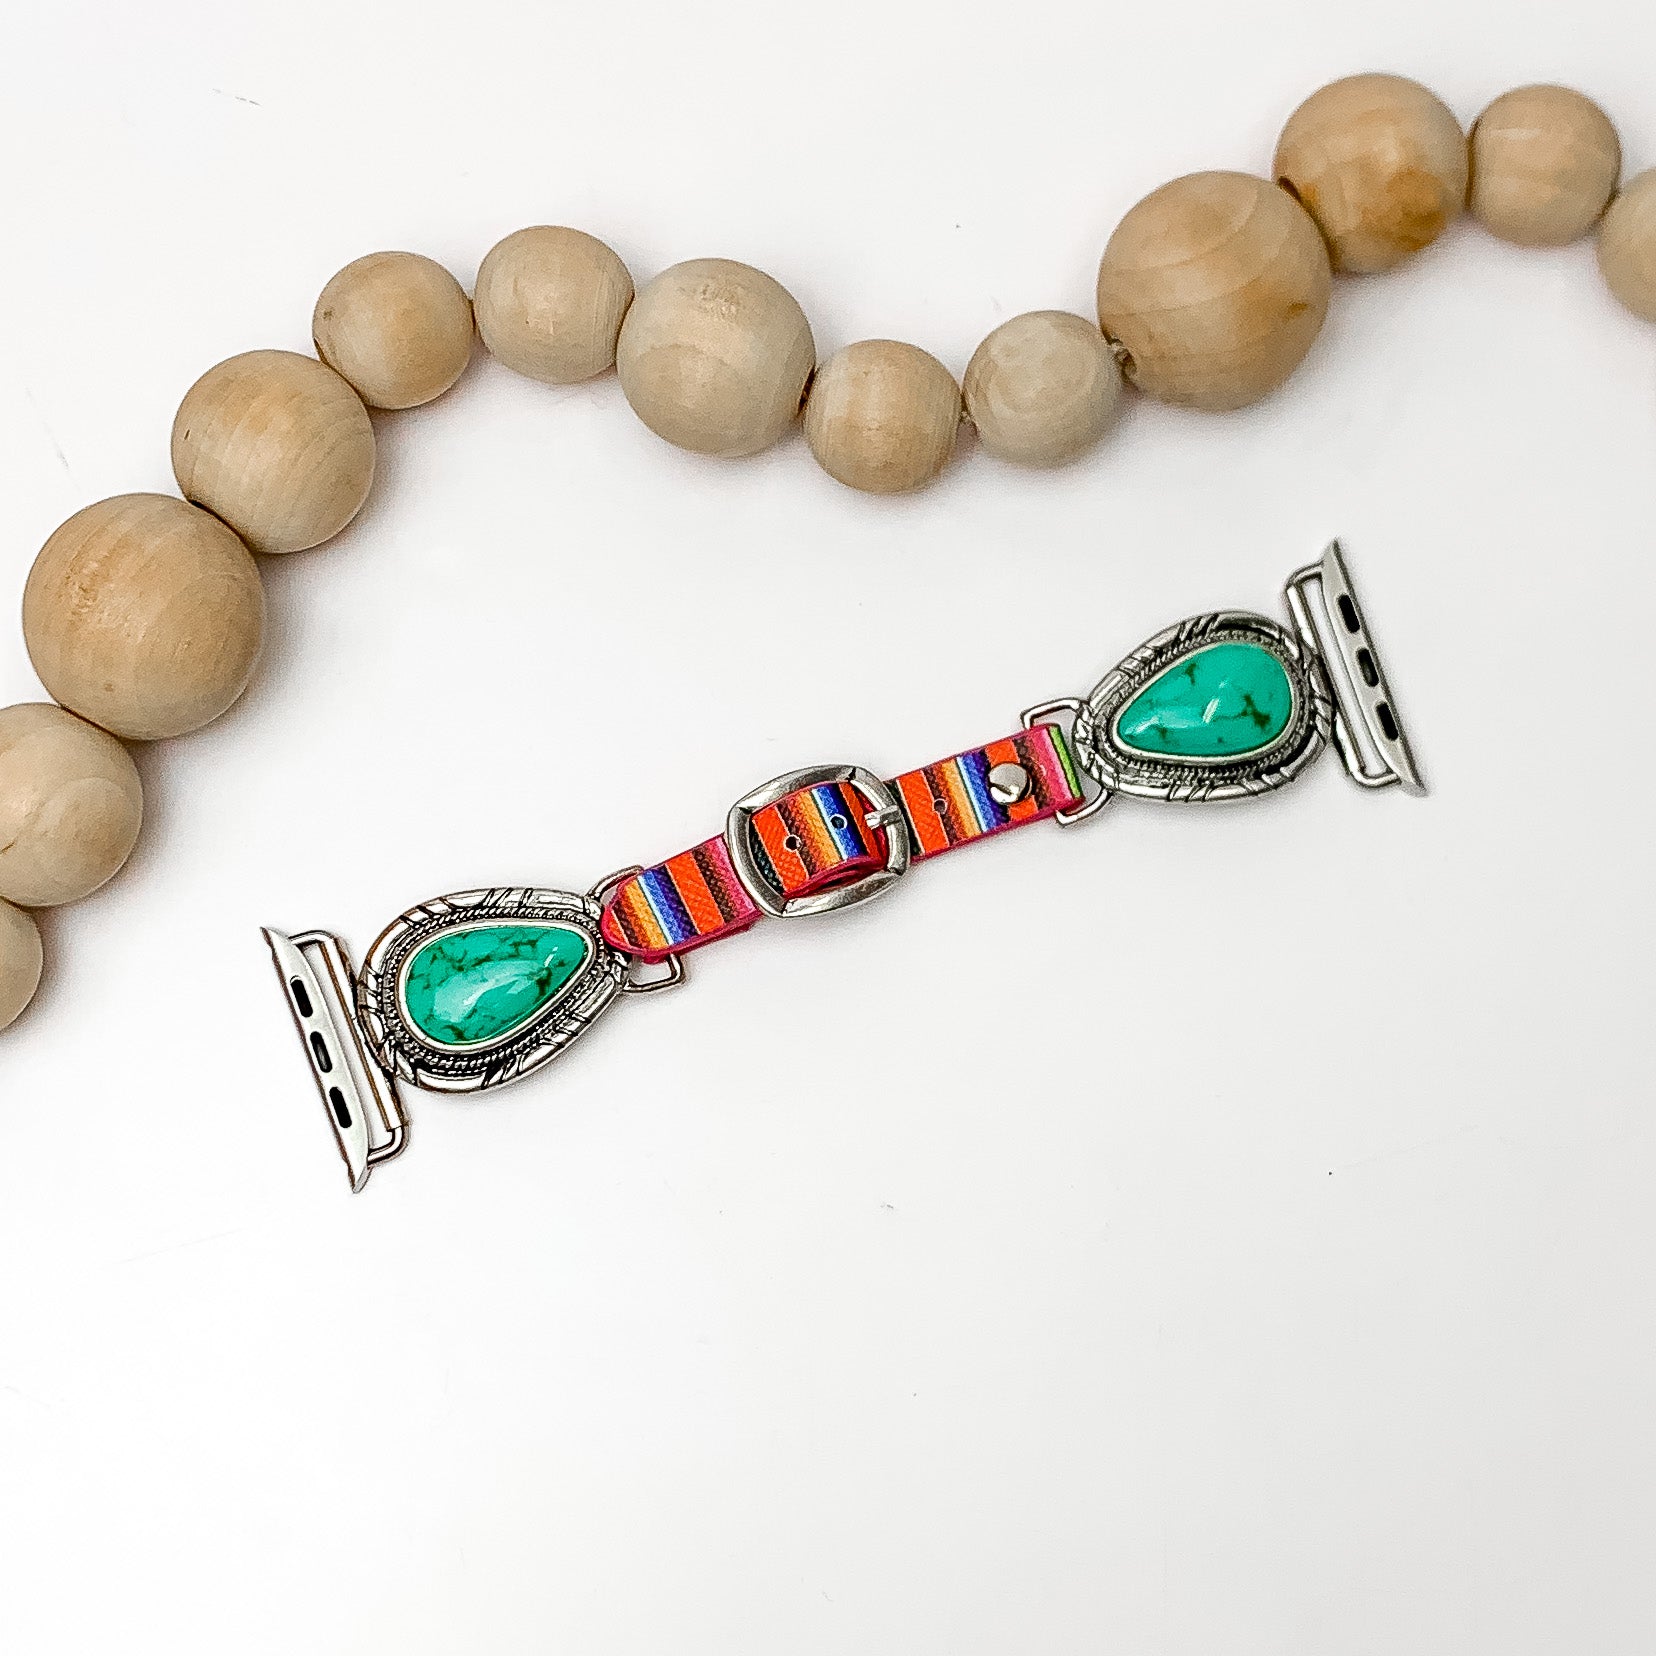 Turquoise Stone Watch Band With Colorful Stripes. Pictured on a white background with the watch band below wooden decorative beads.